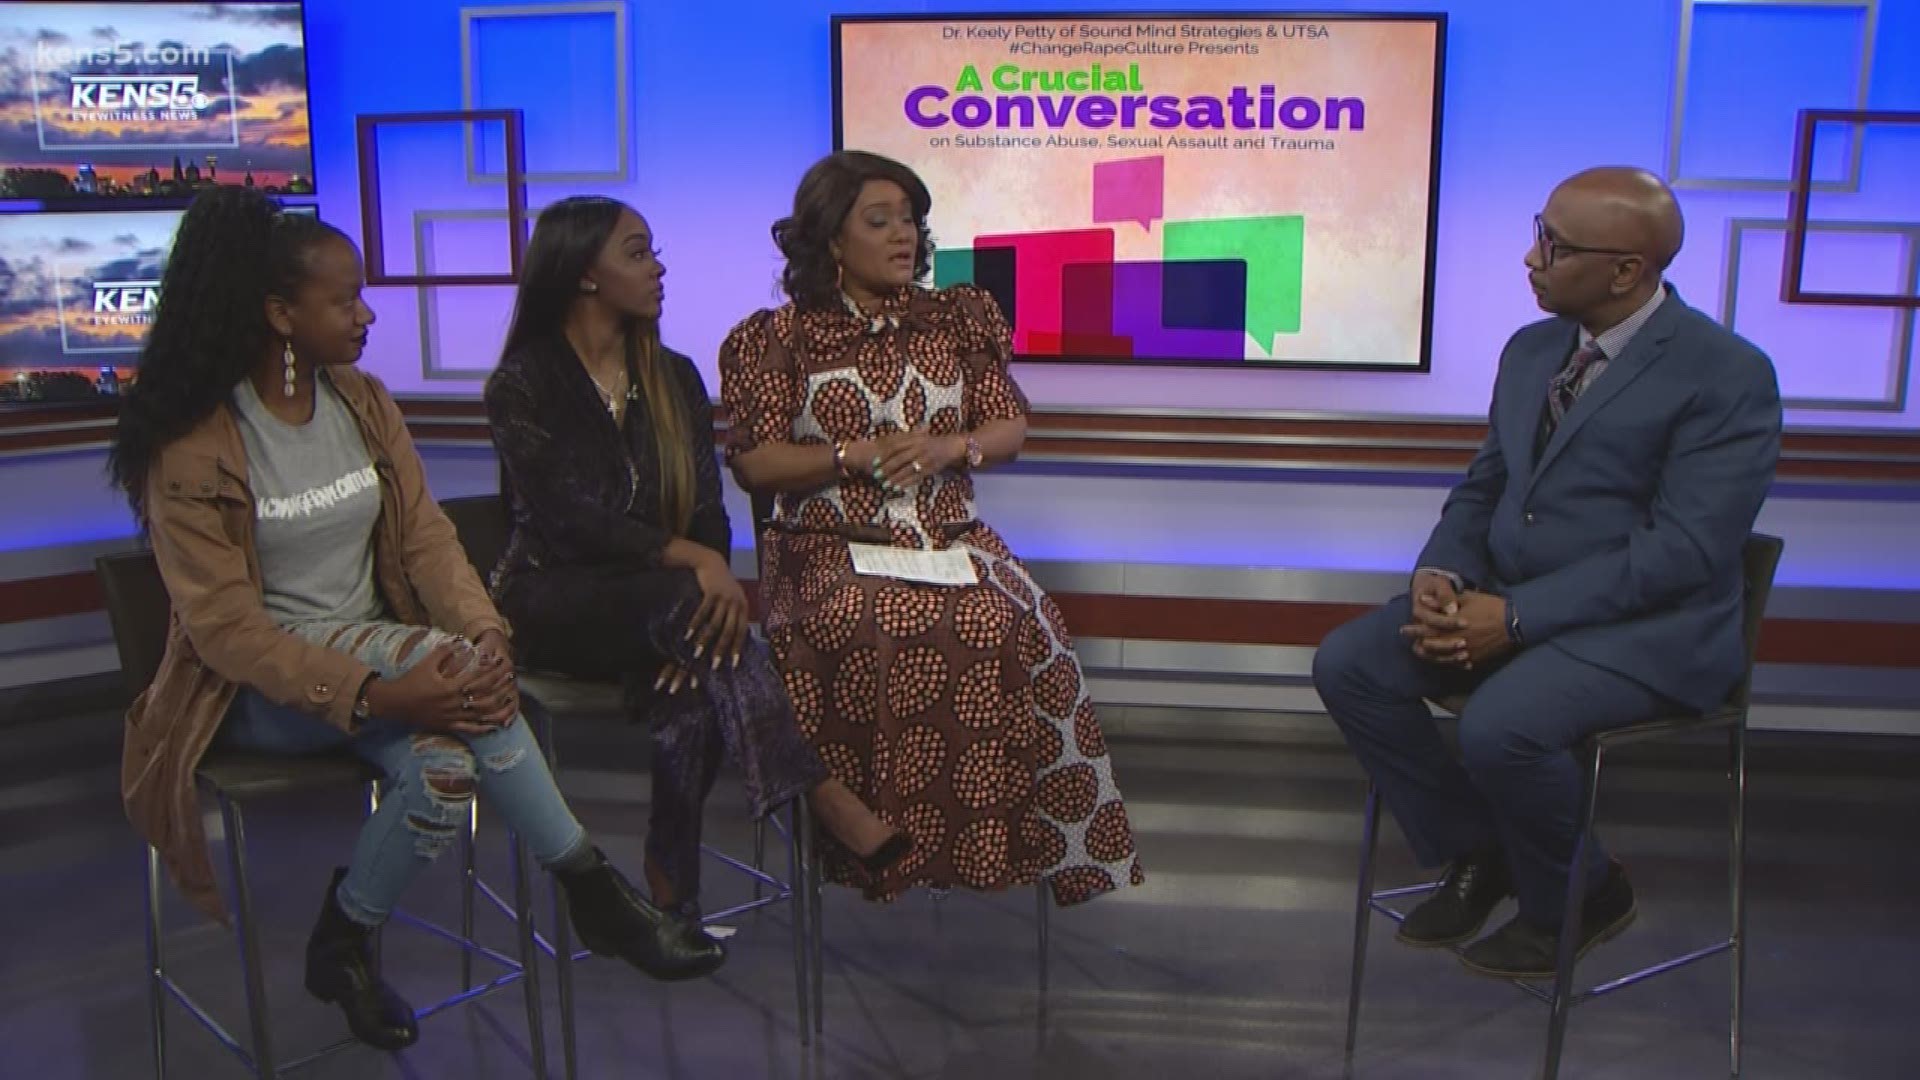 KENS 5 Marvin Hurst sits down with Faith Rodgers, the ex-girlfriend of R&B singer R. Kelly, to talk about an upcoming event, "A Crucial Conversation", where topics such as substance abuse, sexual assault, and trauma will be discussed.